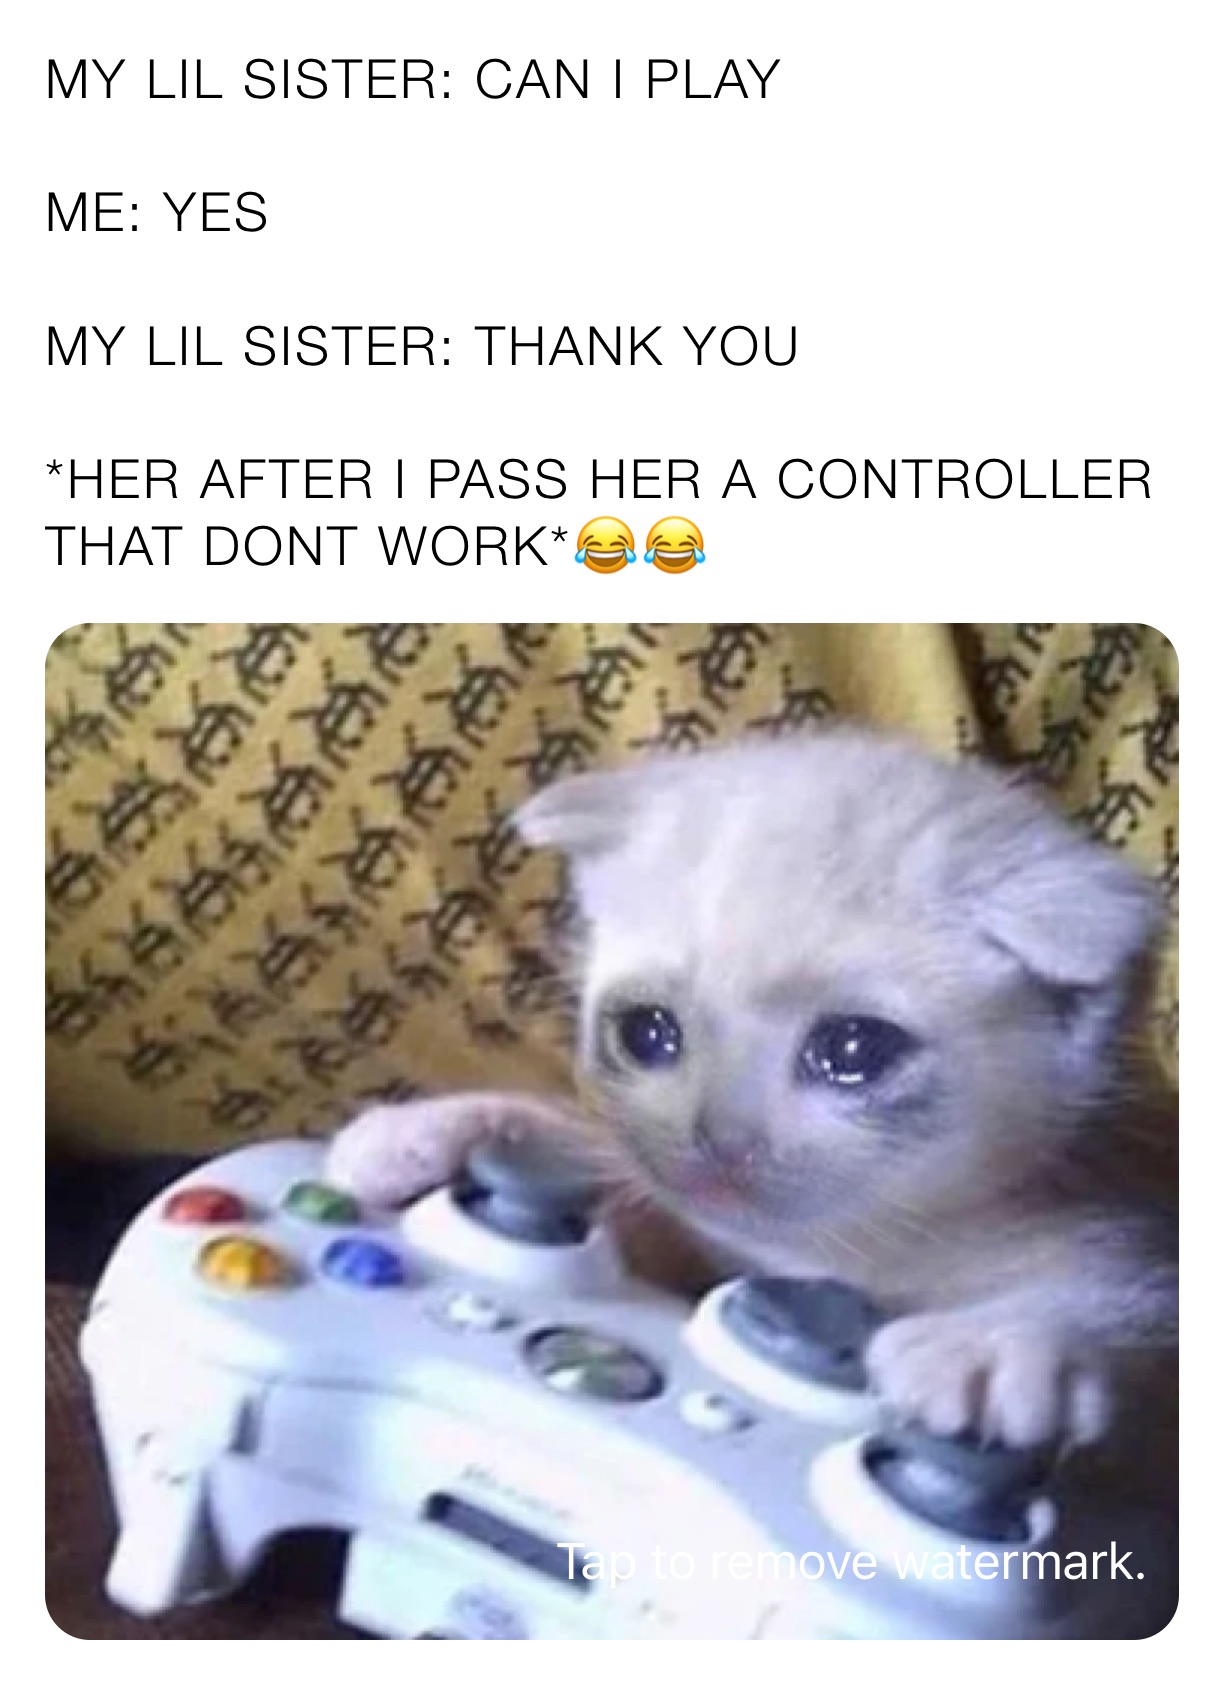 MY LIL SISTER: CAN I PLAY

ME: YES 

MY LIL SISTER: THANK YOU

*HER AFTER I PASS HER A CONTROLLER THAT DONT WORK*😂😂